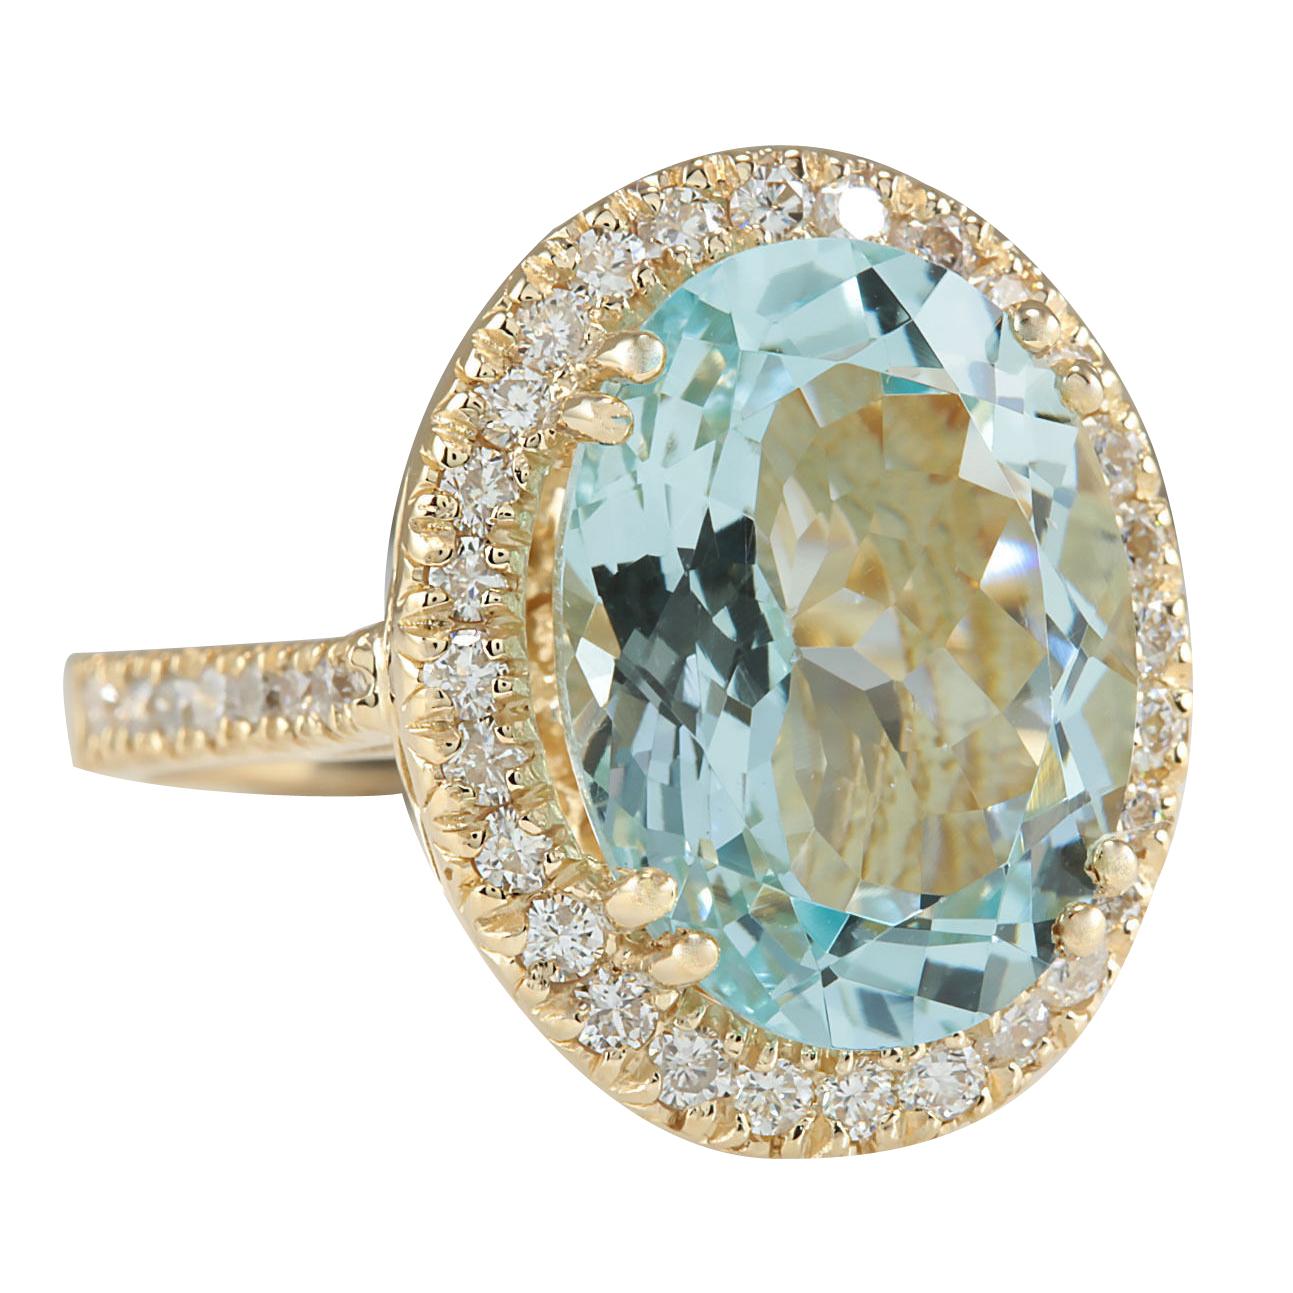 Presenting our striking 9.33 Carat Natural Aquamarine 14 Karat Yellow Gold Diamond Ring, a testament to exquisite craftsmanship and timeless elegance. Crafted from stamped 14K Yellow Gold, this ring boasts a total weight of 7.5 grams. Its